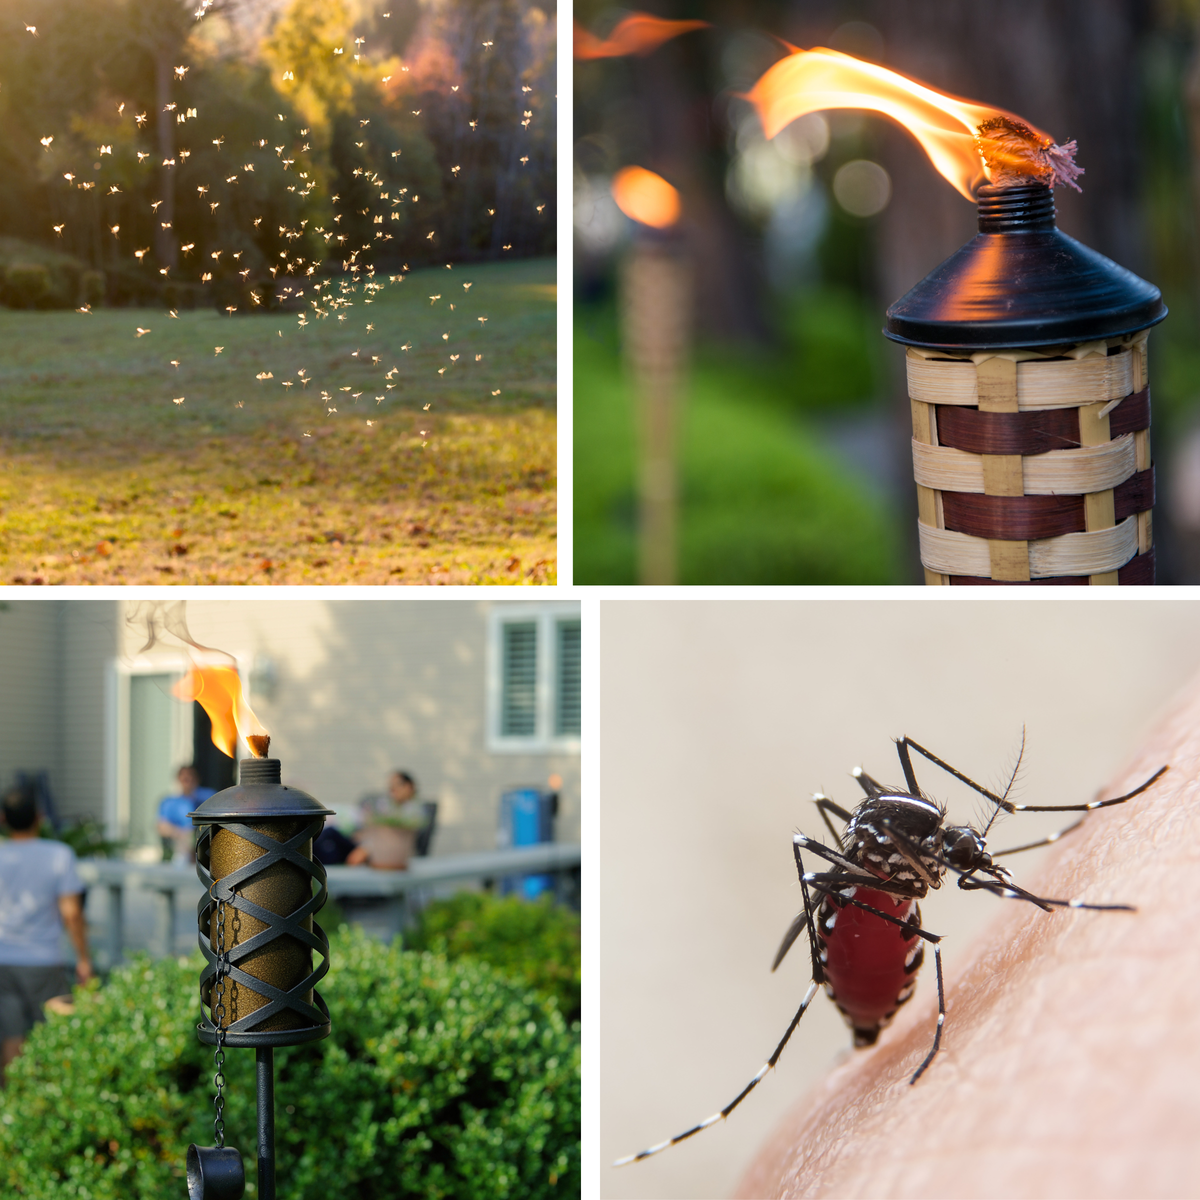 yard with mosquitoes, lit tiki torches in yard, mosquito on skin